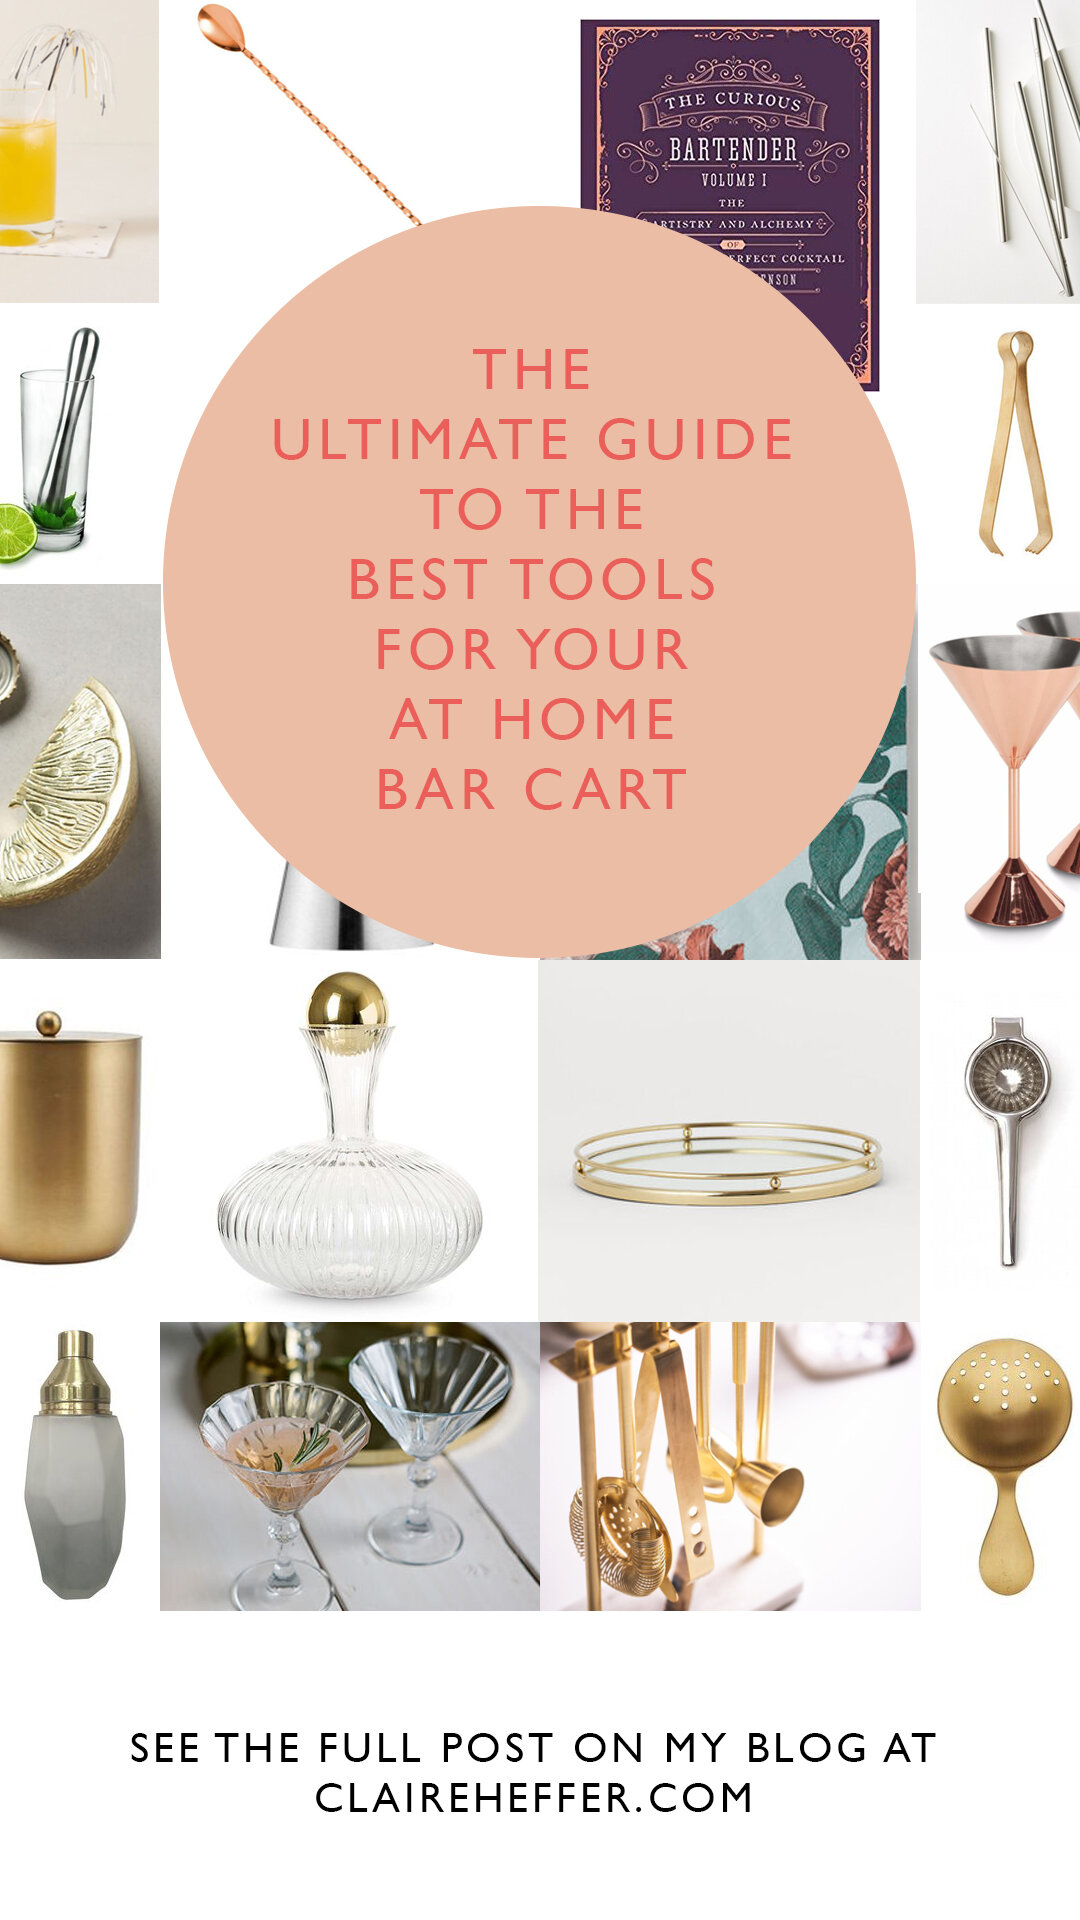 THE ULTIMATE GUIDE TO YOUR PERFECT BAR TOOLS FOR YOUR AT HOME BAR CART.jpg